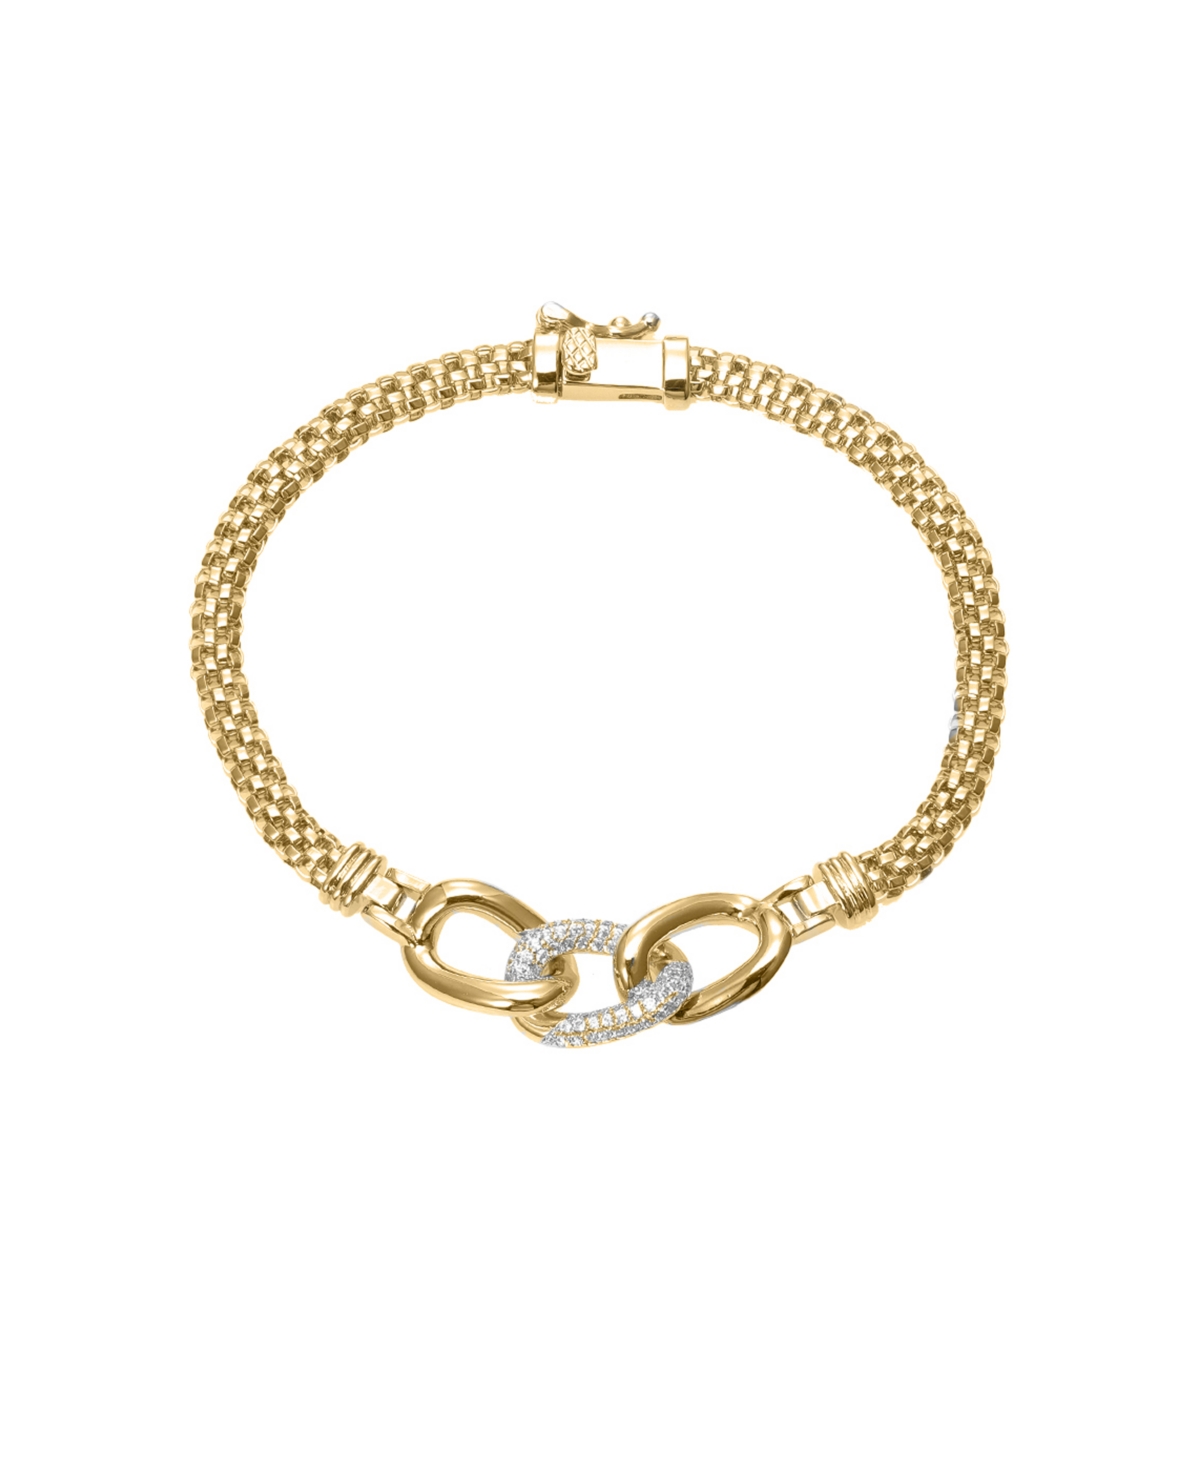 Cubic Zirconia Pave Accented Link Chain Bracelet - Gold